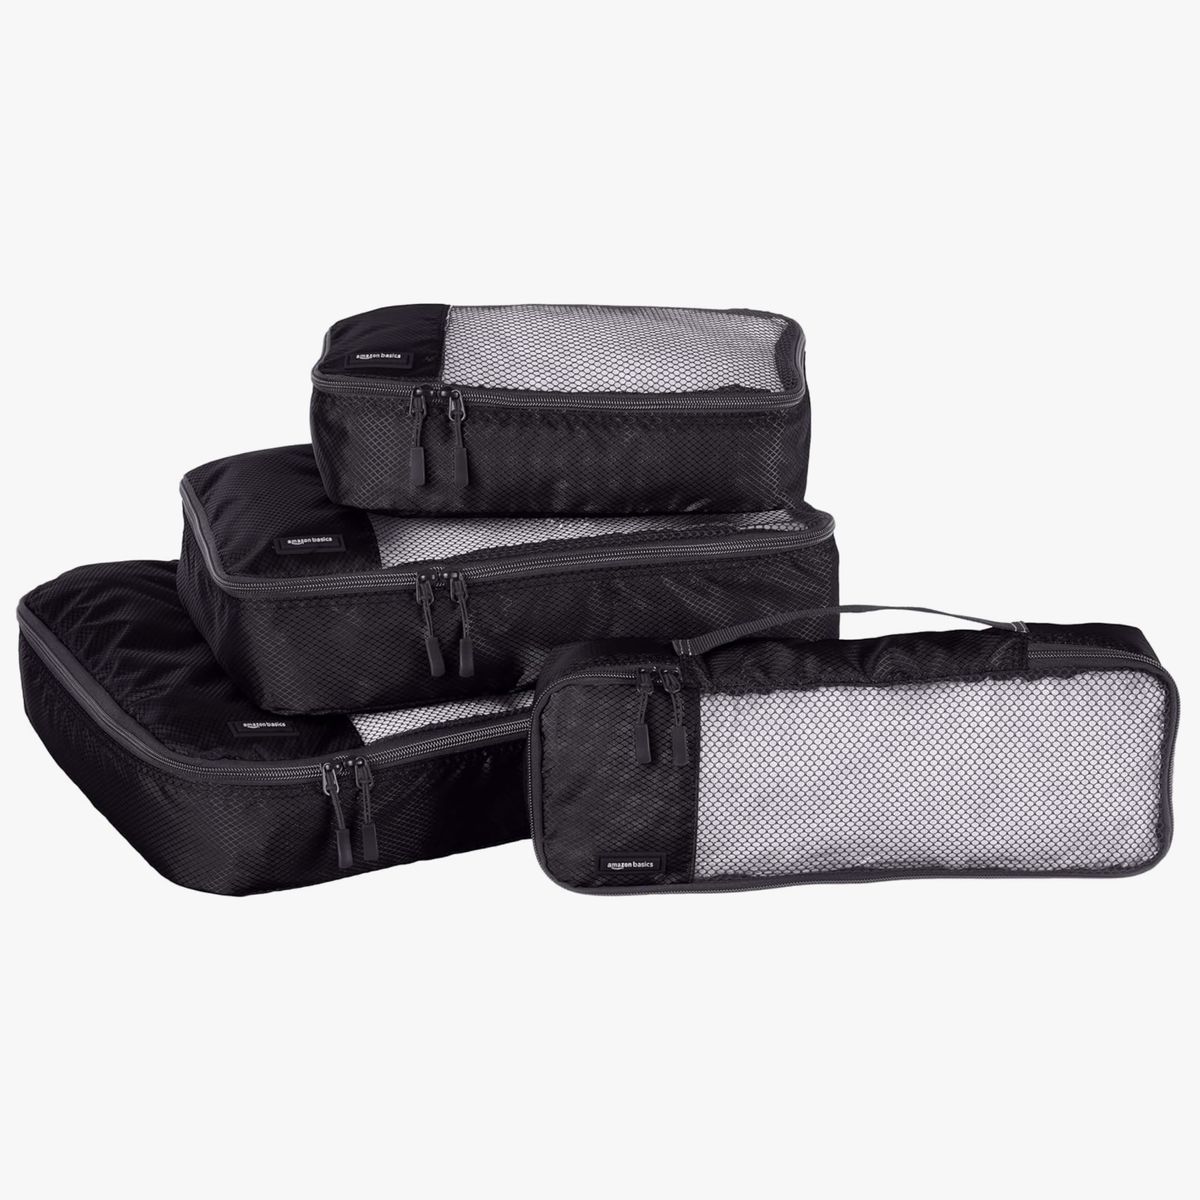 Monos Compression Packing Cubes (Set of 4)